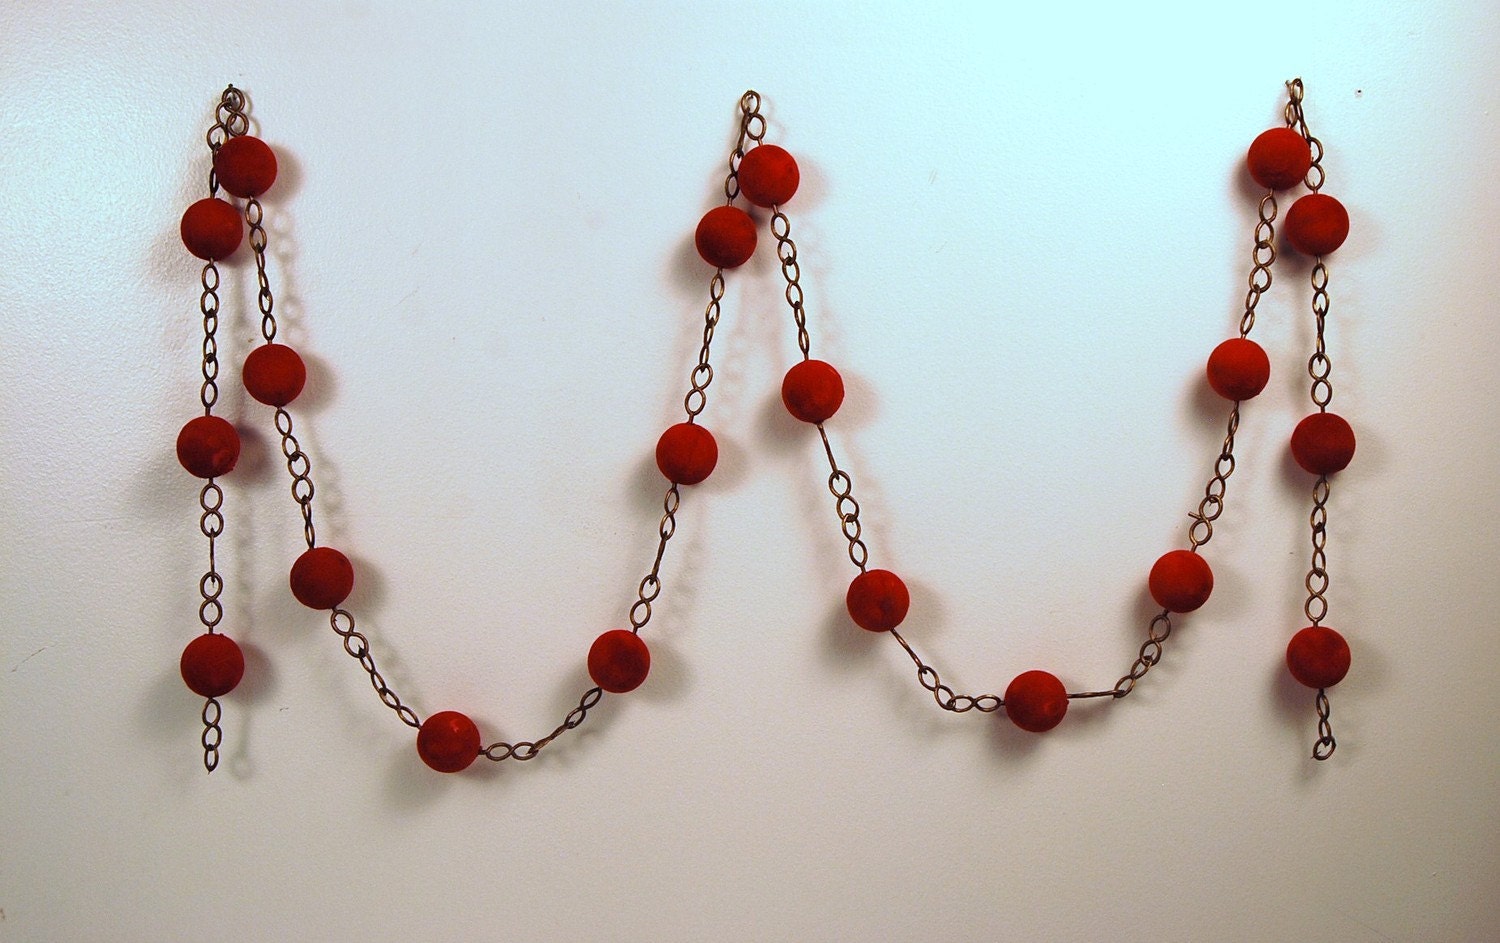 Vintage 1960's RED Round and Gold CHAIN Garland........six feet